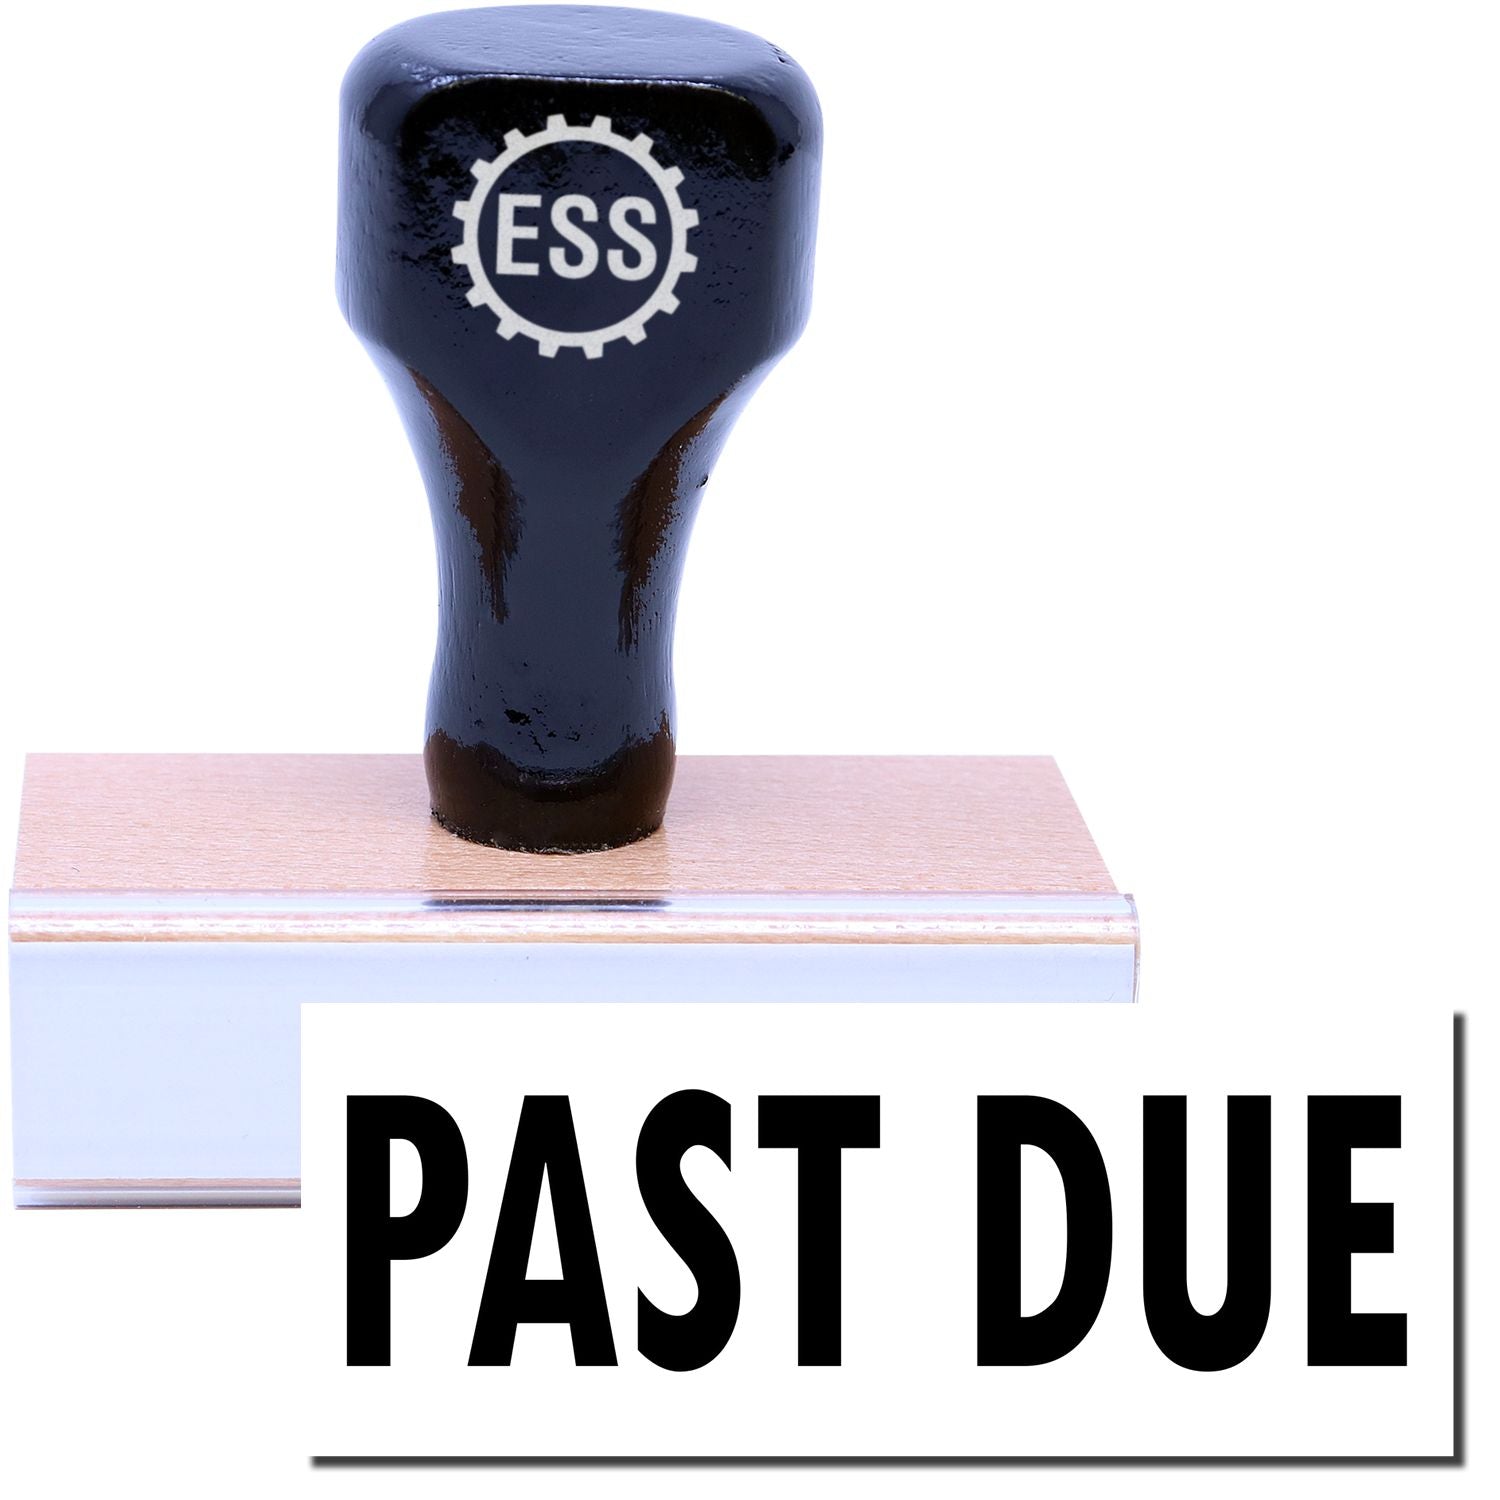 A stock office rubber stamp with a stamped image showing how the text "PAST DUE" is displayed after stamping.